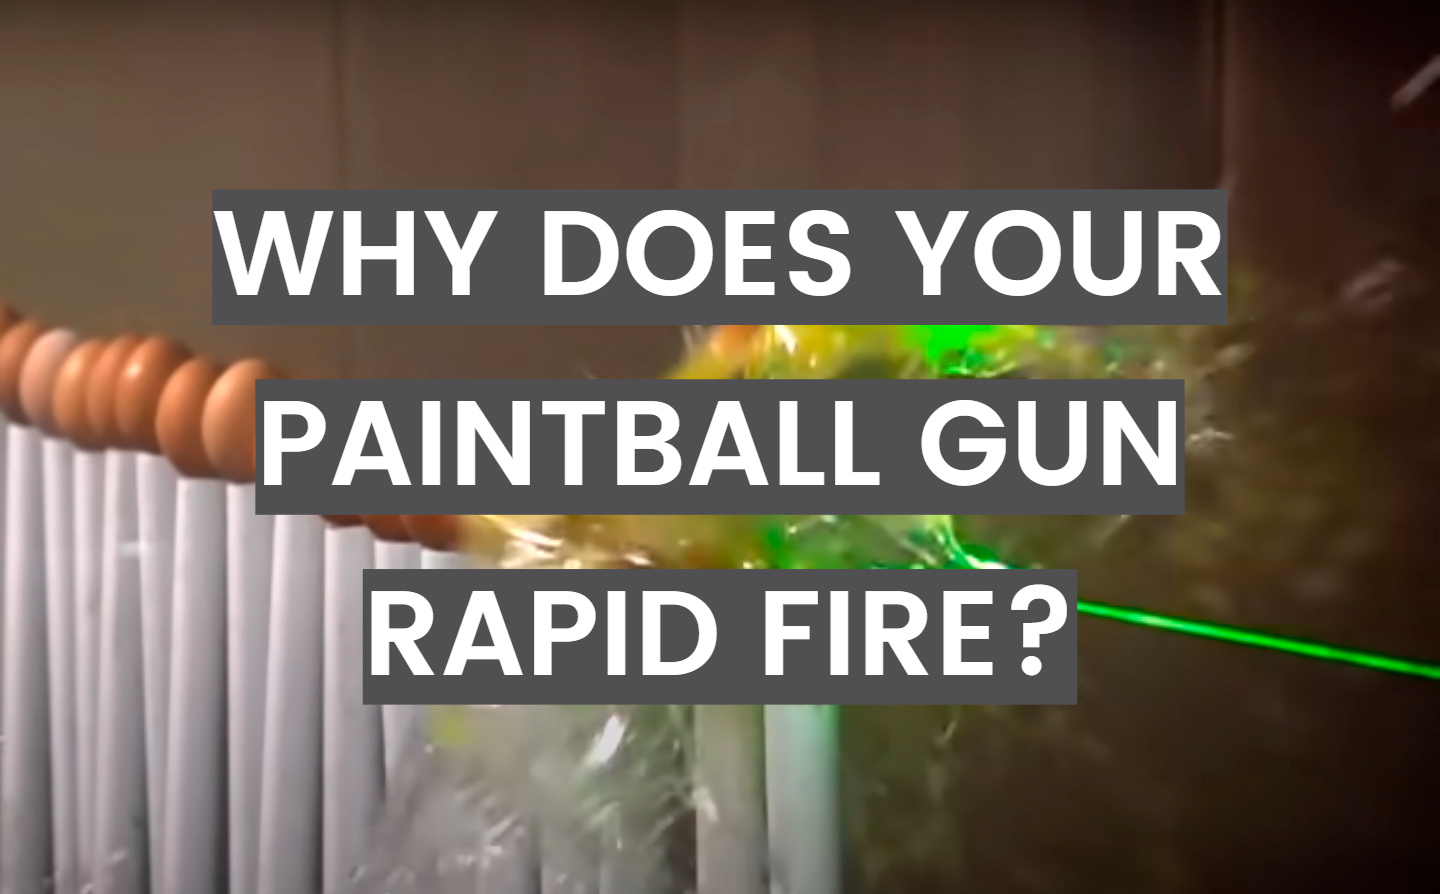 Why Does Your Paintball Gun Rapid Fire?